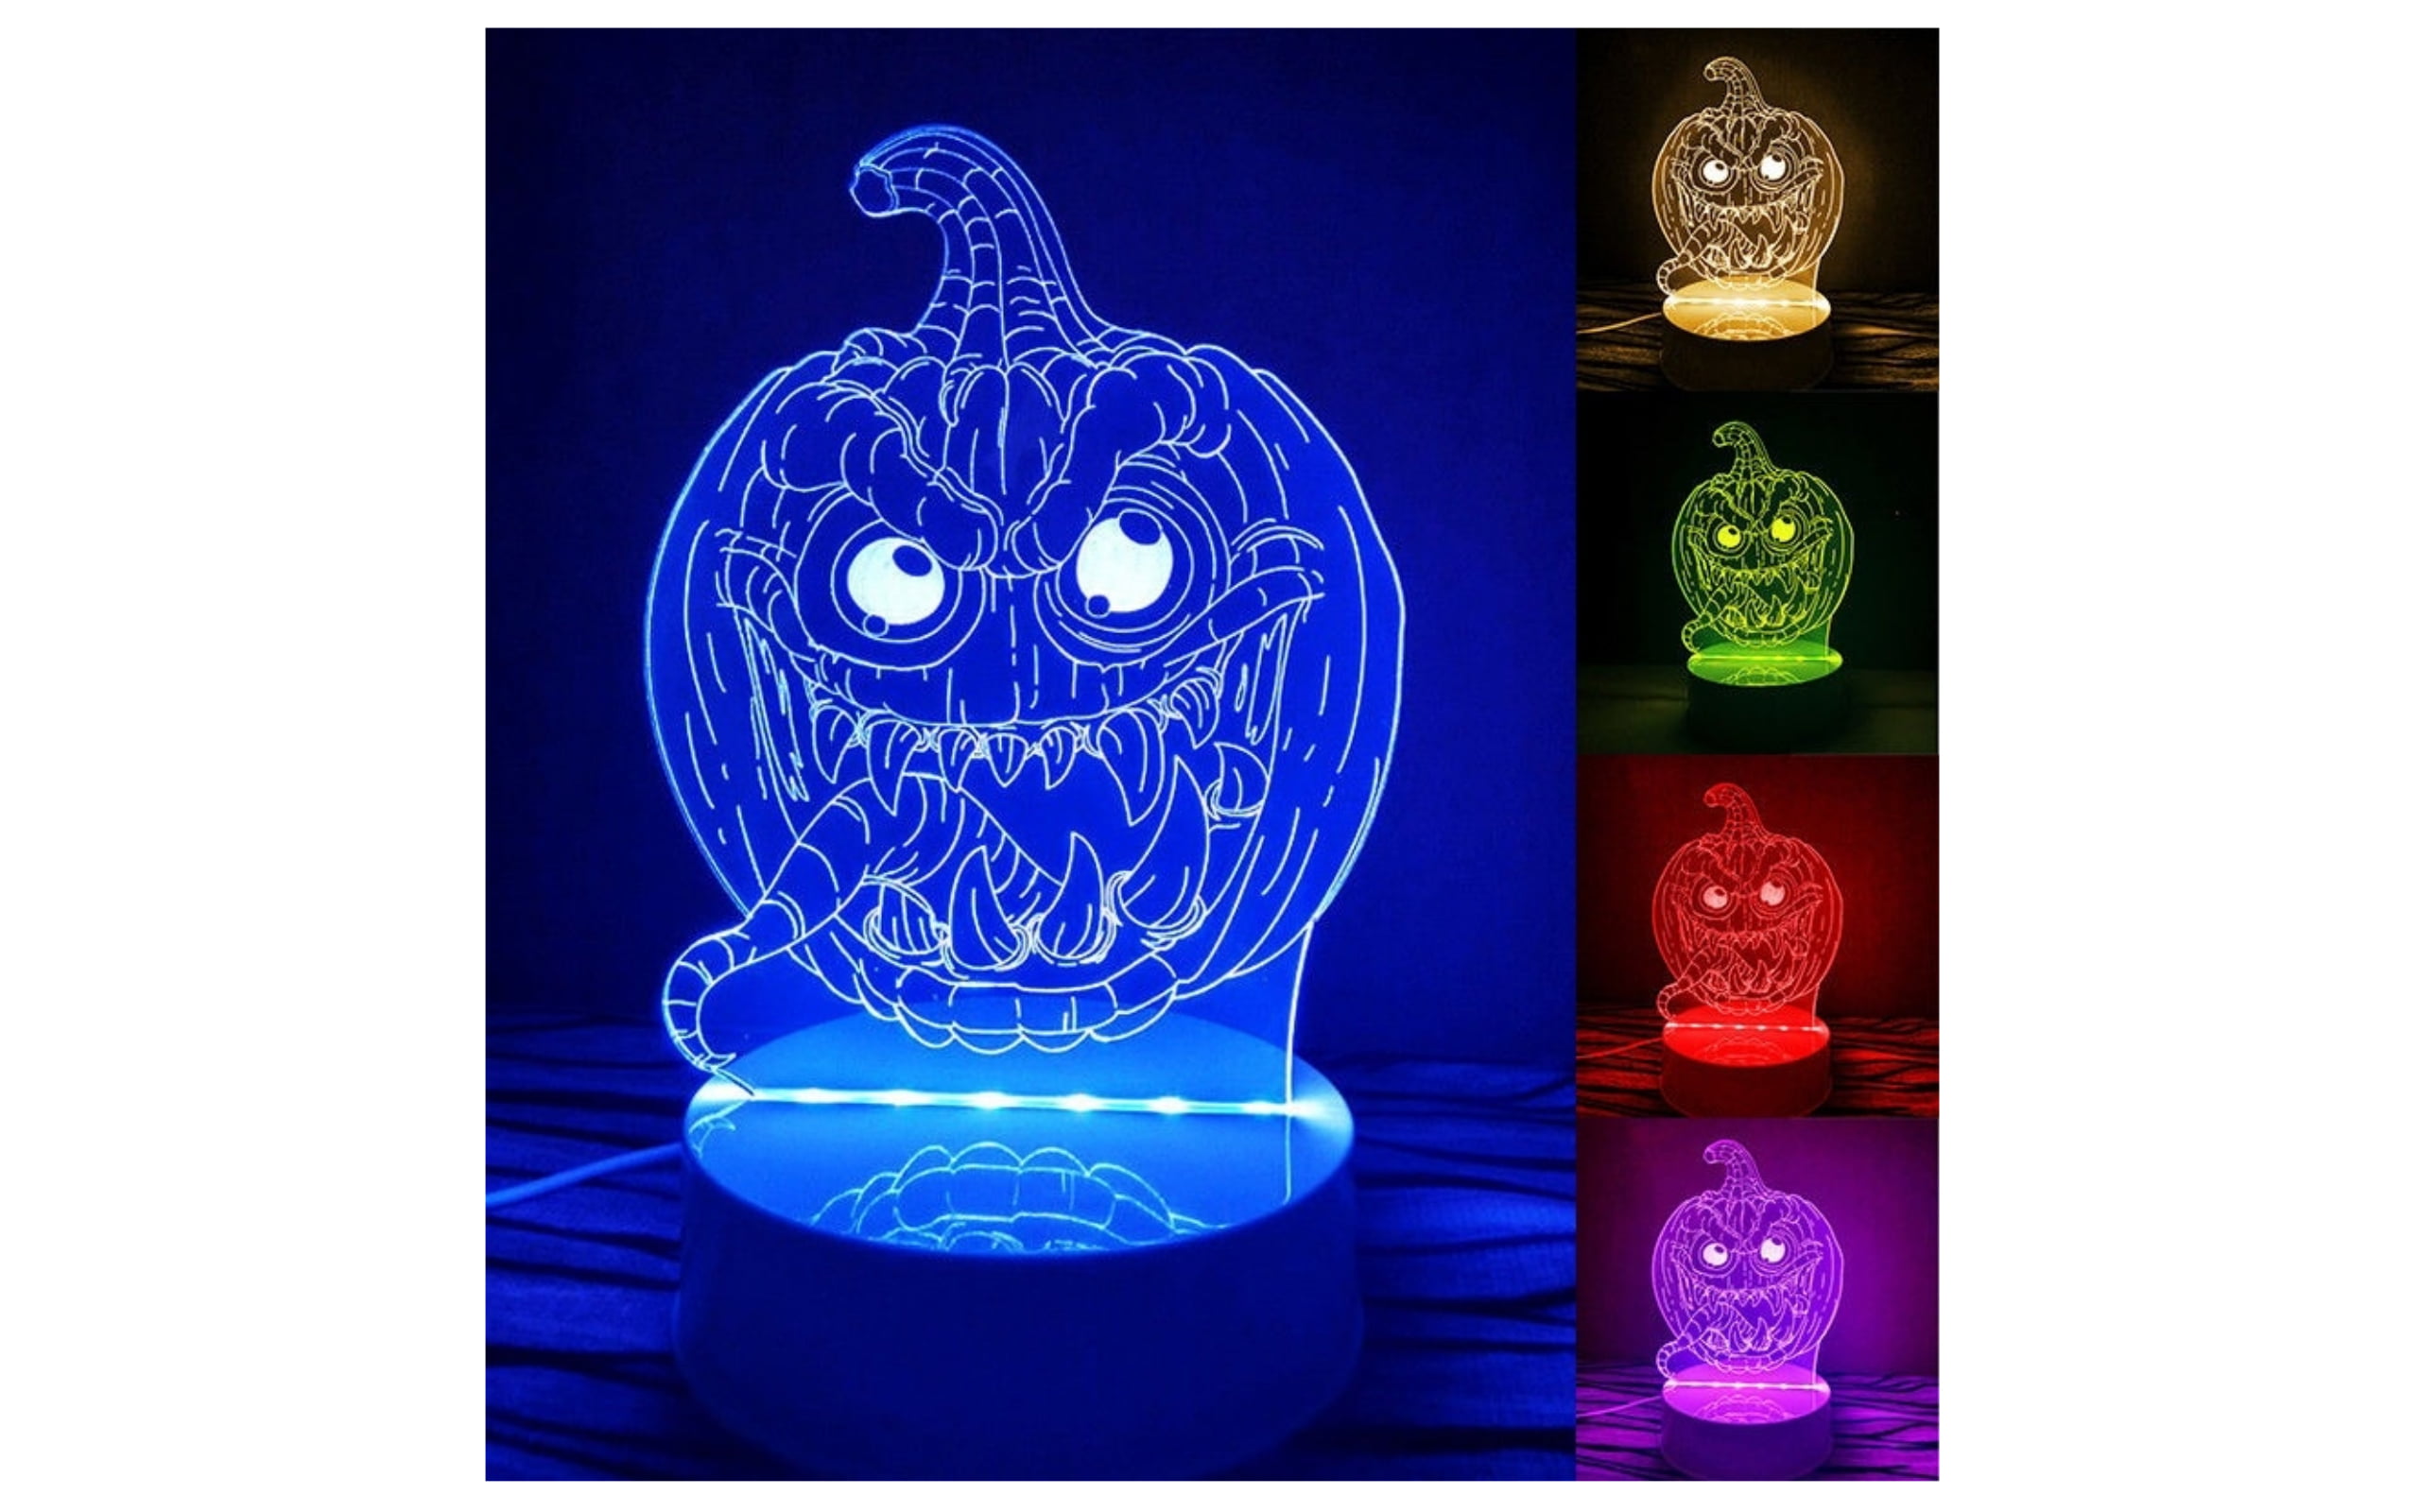 Halloween Table Decorations Indoor Light up Pumpkin Cat Witch Skeleton Pattern Ornaments 3 Modes Lights Battery Powered Night Lamp Bar Restaurant Home Halloween Indoor Decorations Best Gift